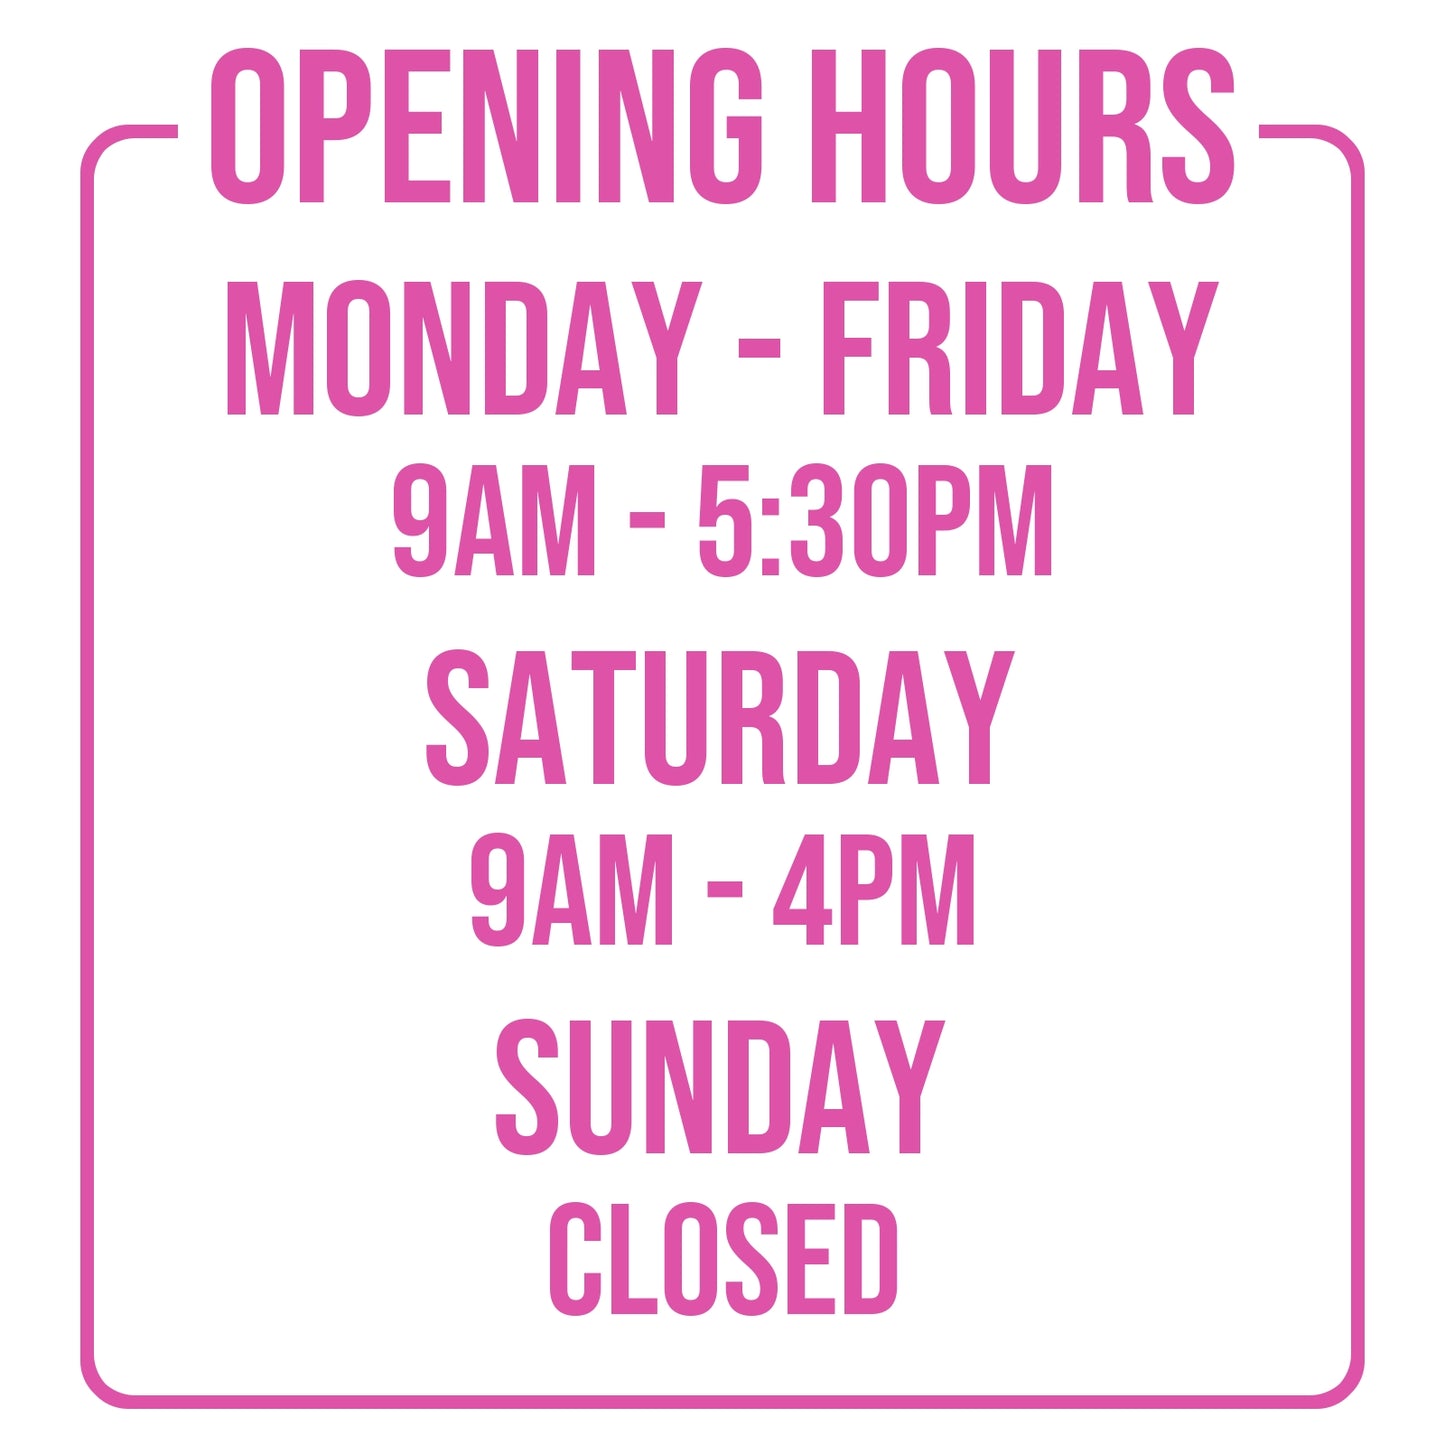 Opening Times for Shop Business Window in Hot Pink